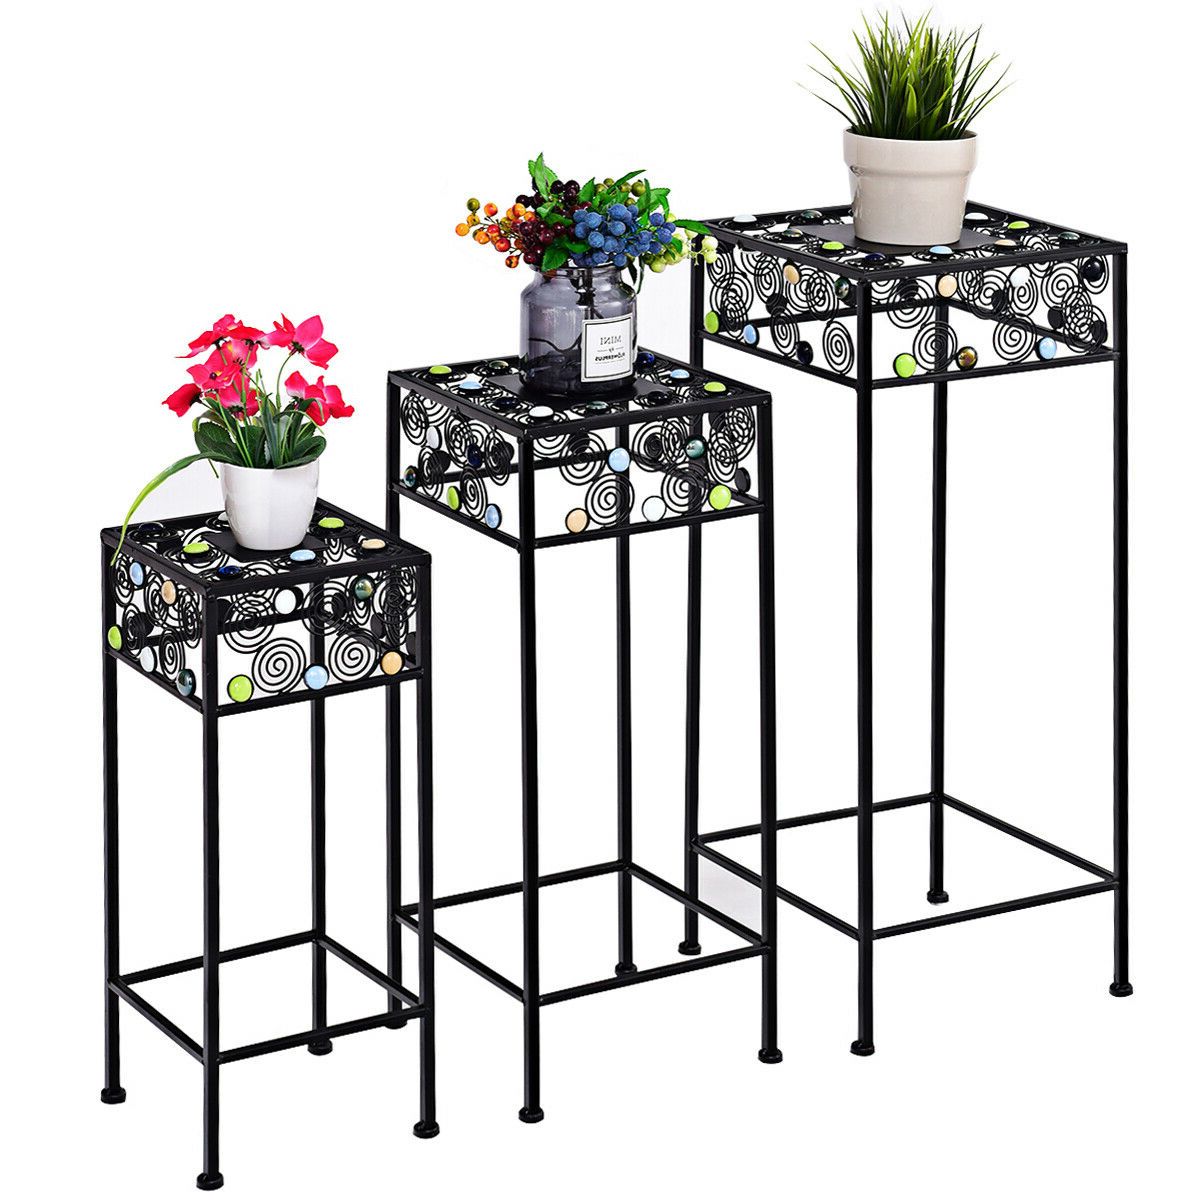 Iron Square Plant Stands Intended For Famous Ironwork Pot Plant Stand With Ceramic Beads Decor, A Set Of 3 Different  Sizes – Walmart (View 15 of 15)